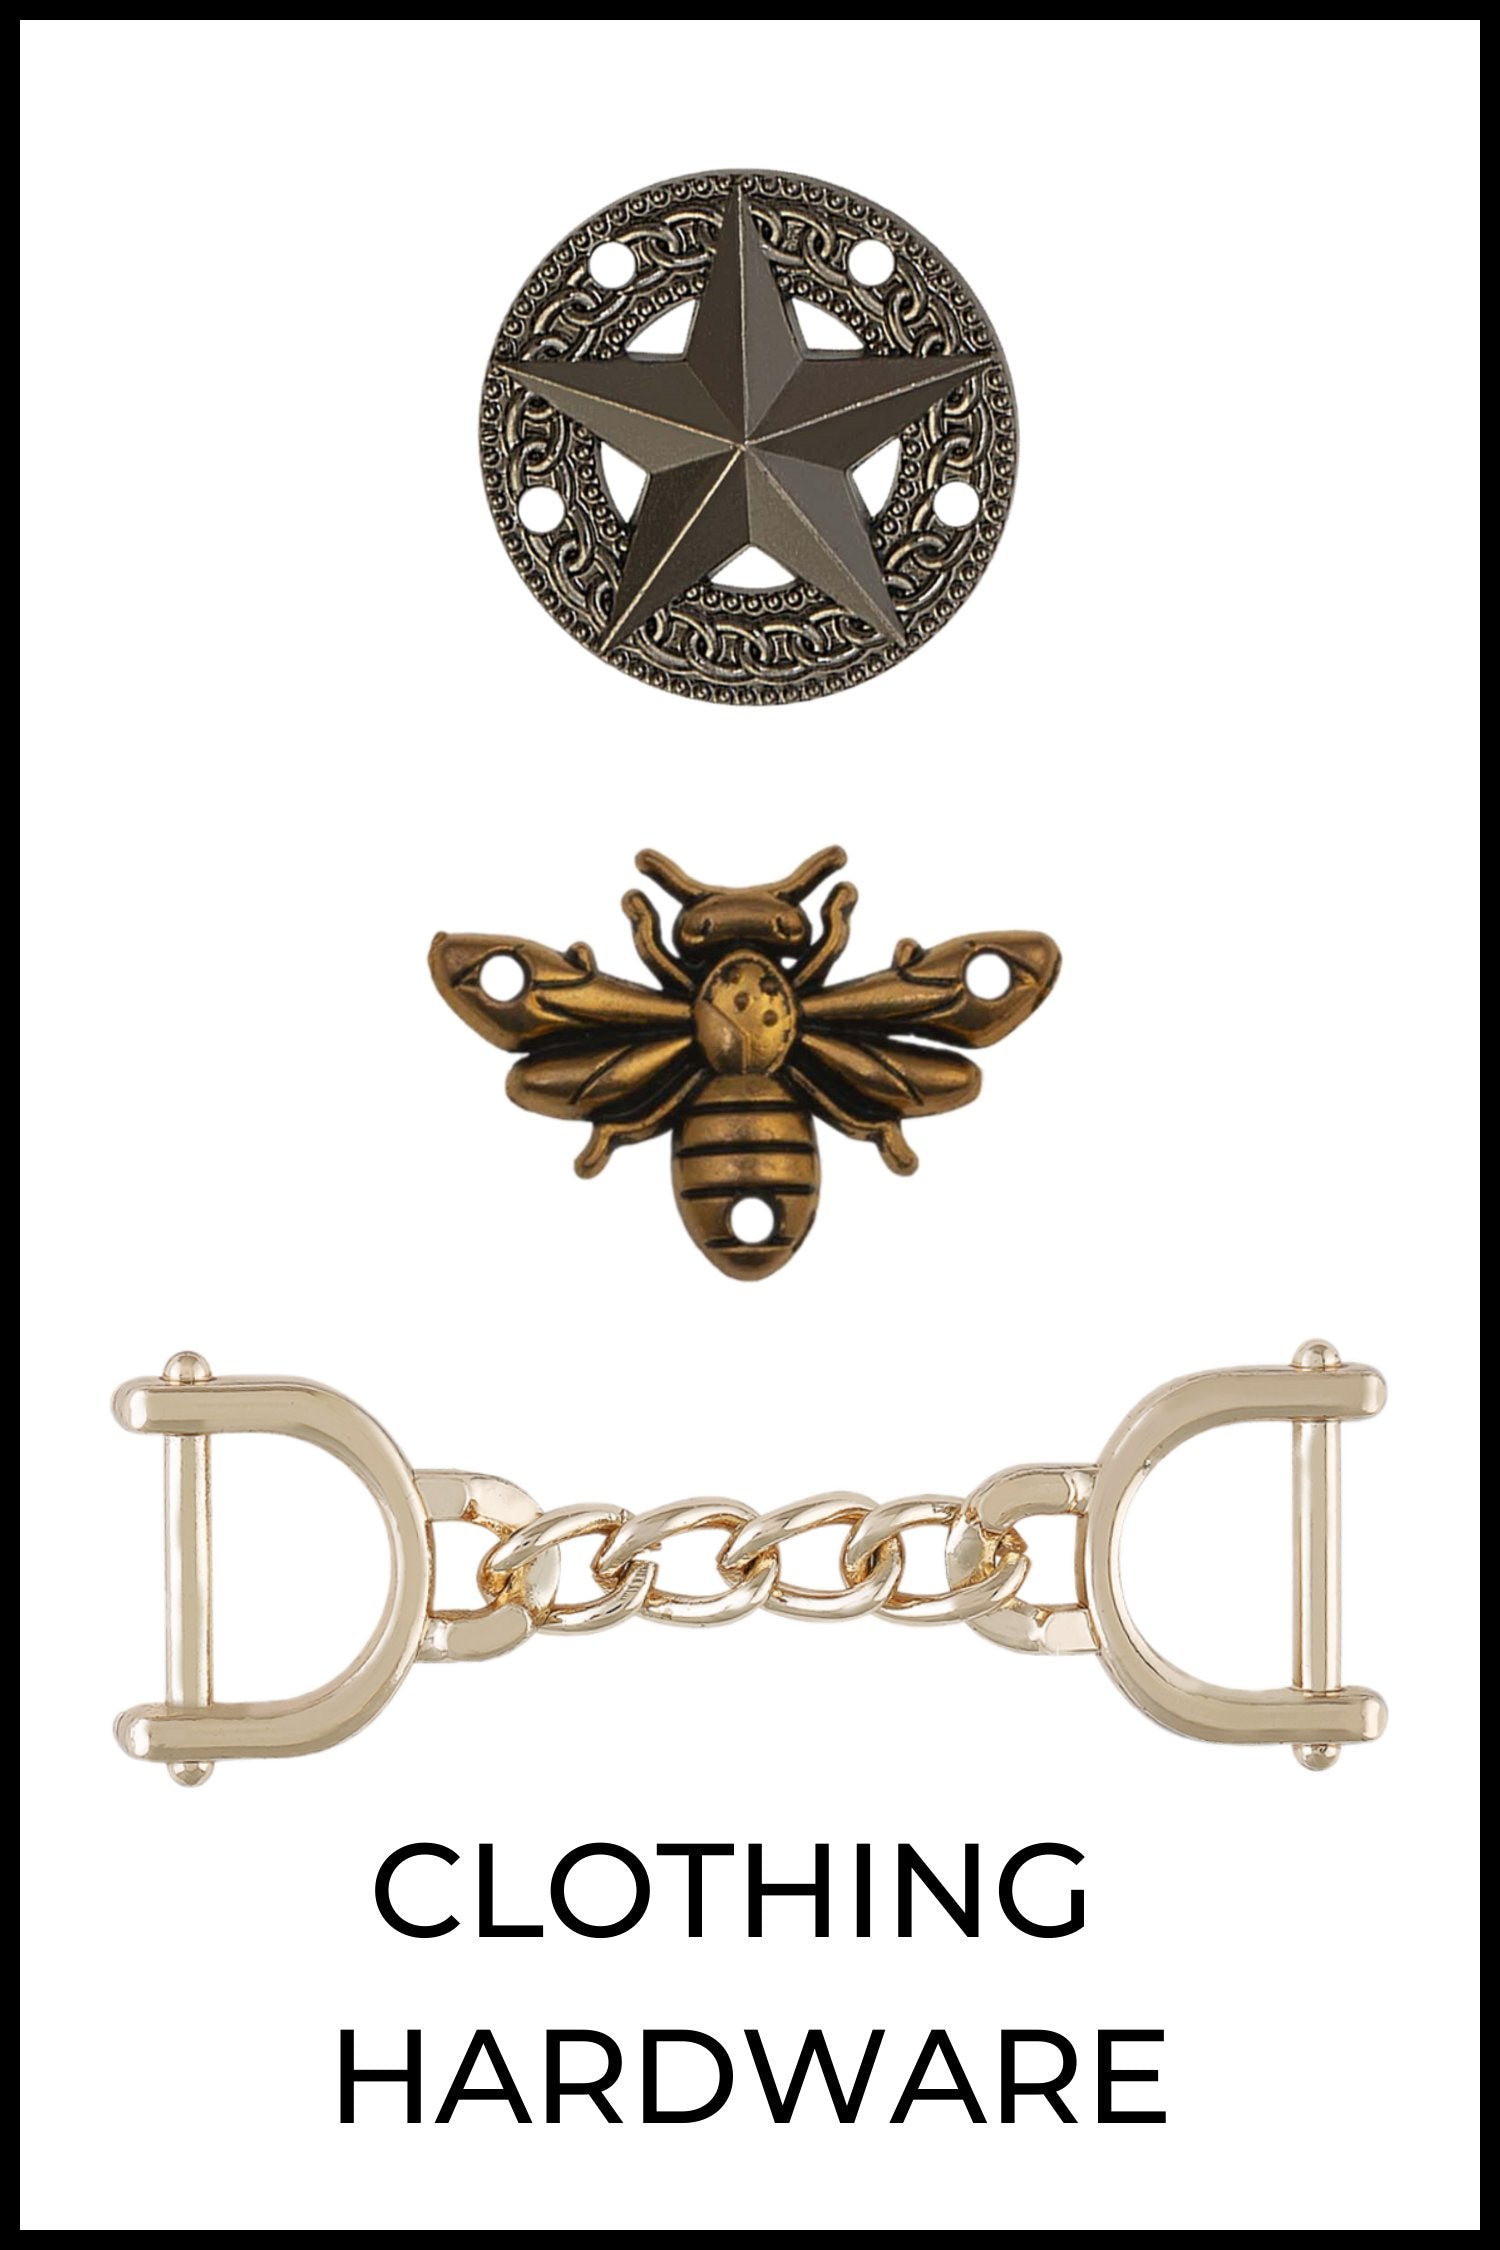 Metal trims & clothing hardware accessories, metal fittings, connectors, bag buckles, shoe buckles& many more classic accessories available on Jhonea Accessories.